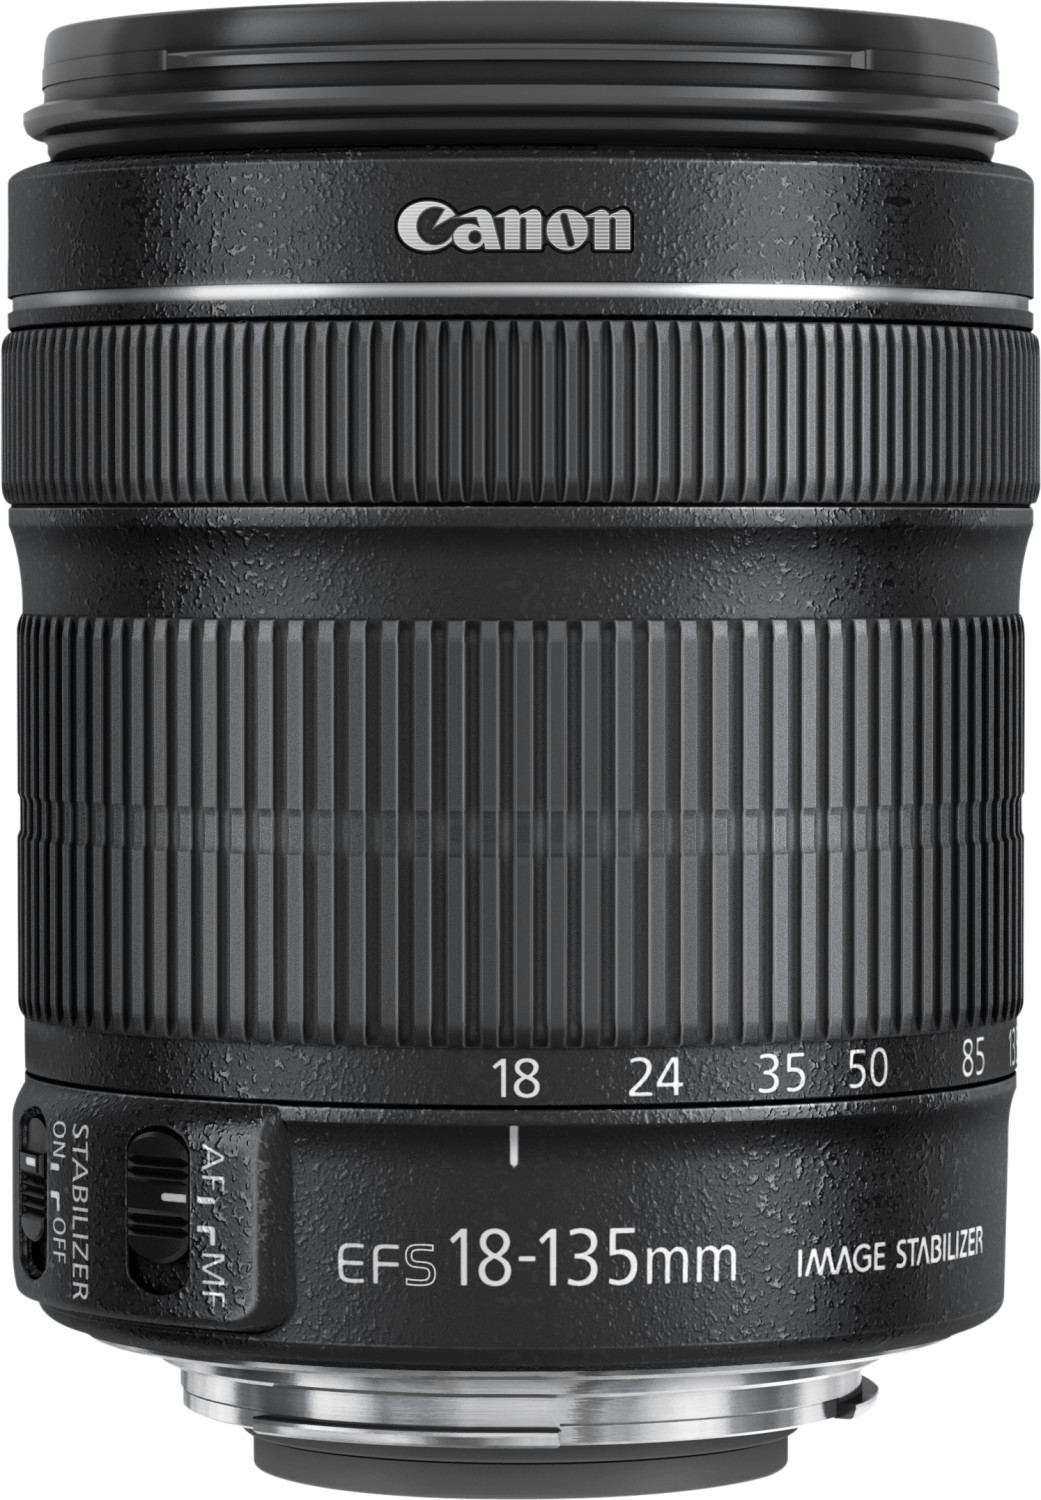 Canon EFS 18-135mm IS STM 【ほぼ未使用】 - その他